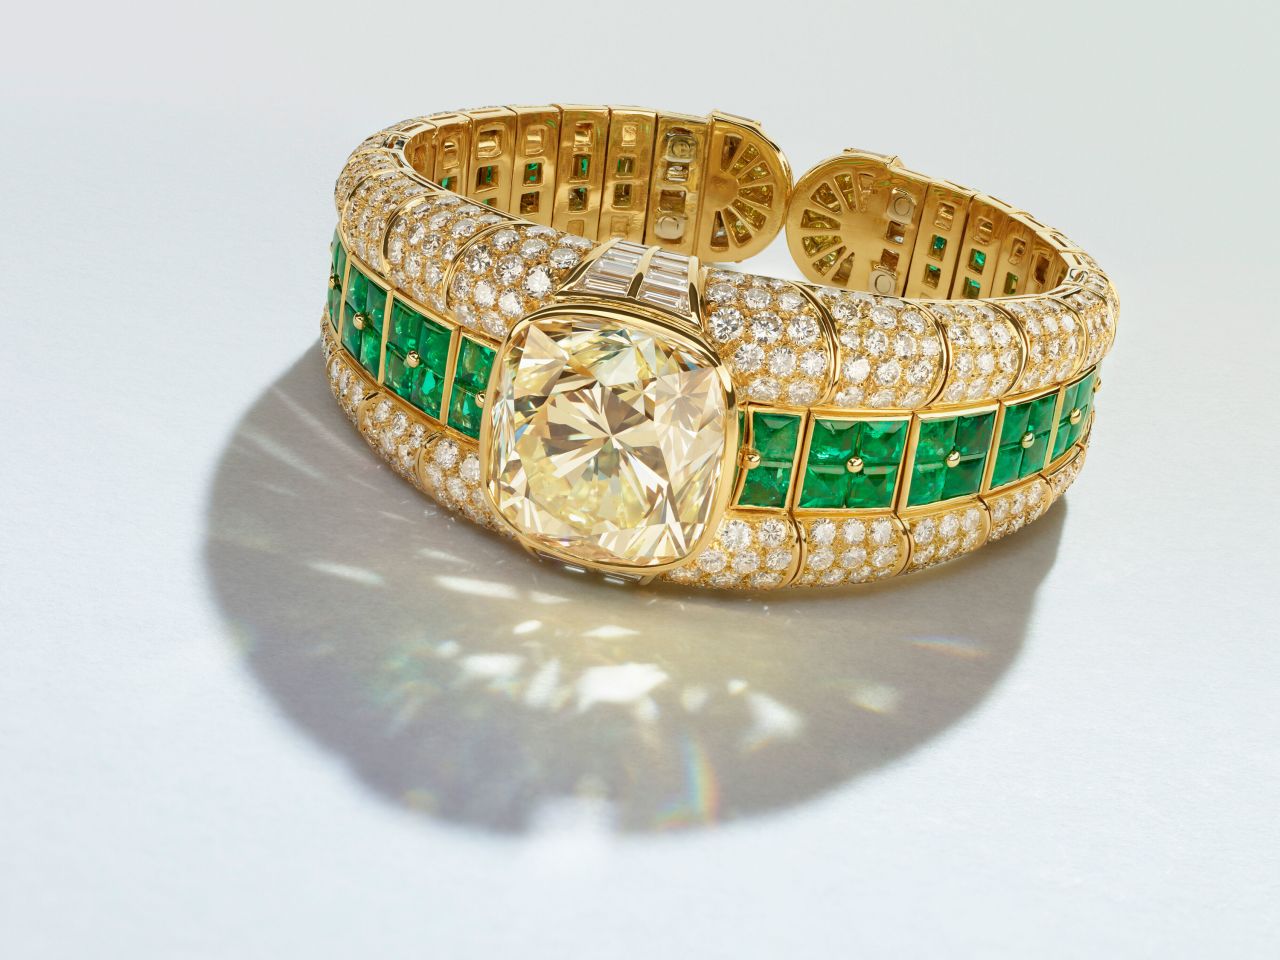 A Bulgari bracelet with colored diamond of 32.23 carats, and square-shaped emeralds.